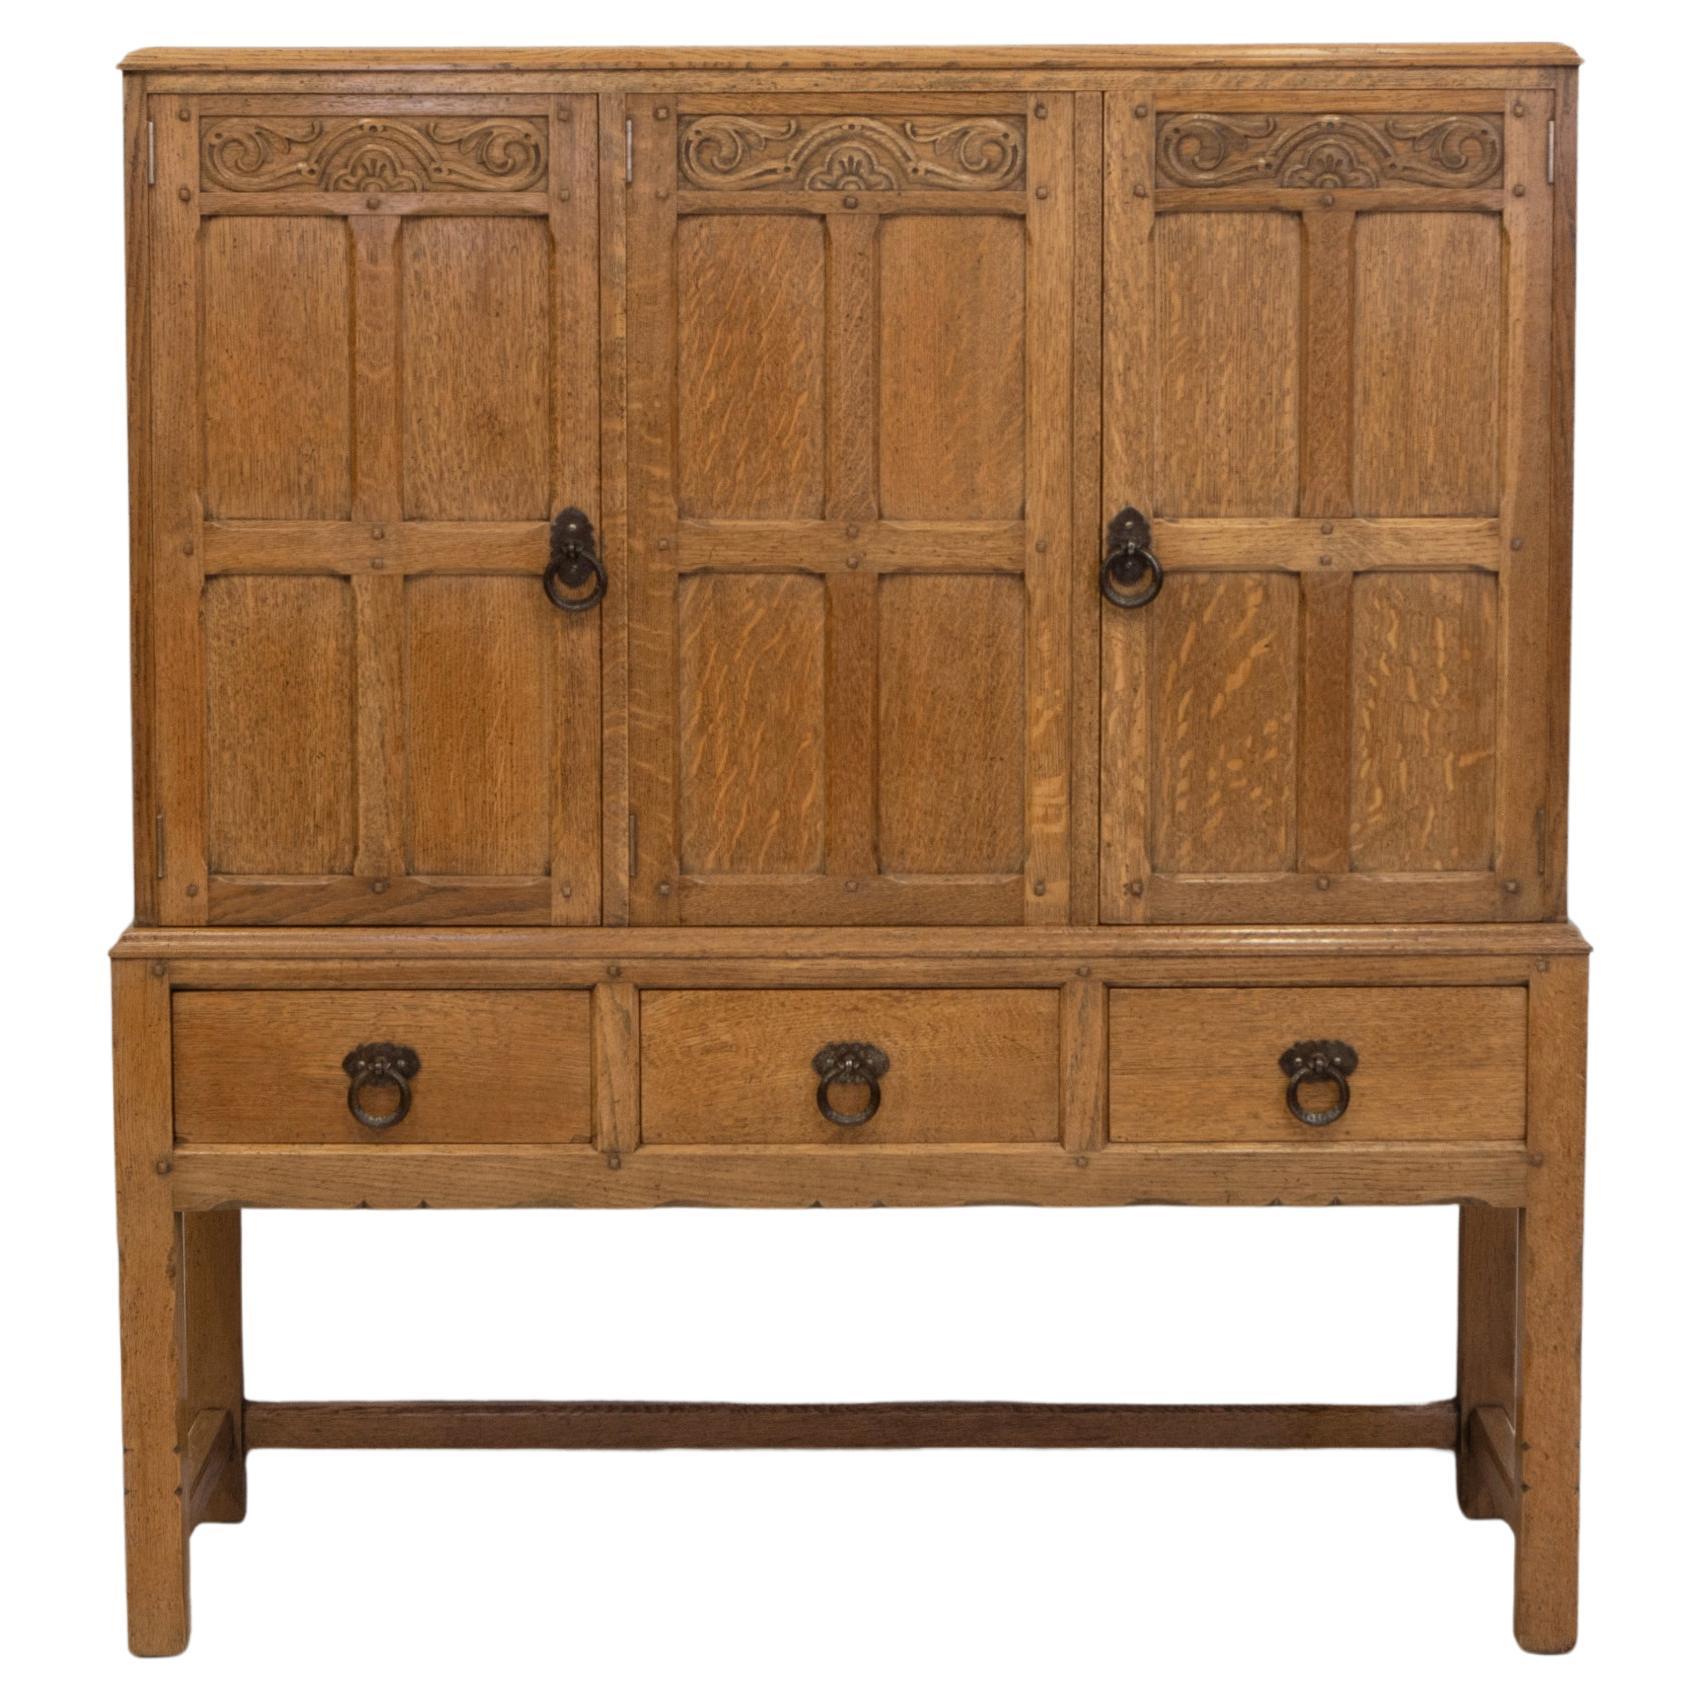 Waring & Gillow Oak Cotswold School Manner Arts And Crafts Cabinet Circa 1920 For Sale